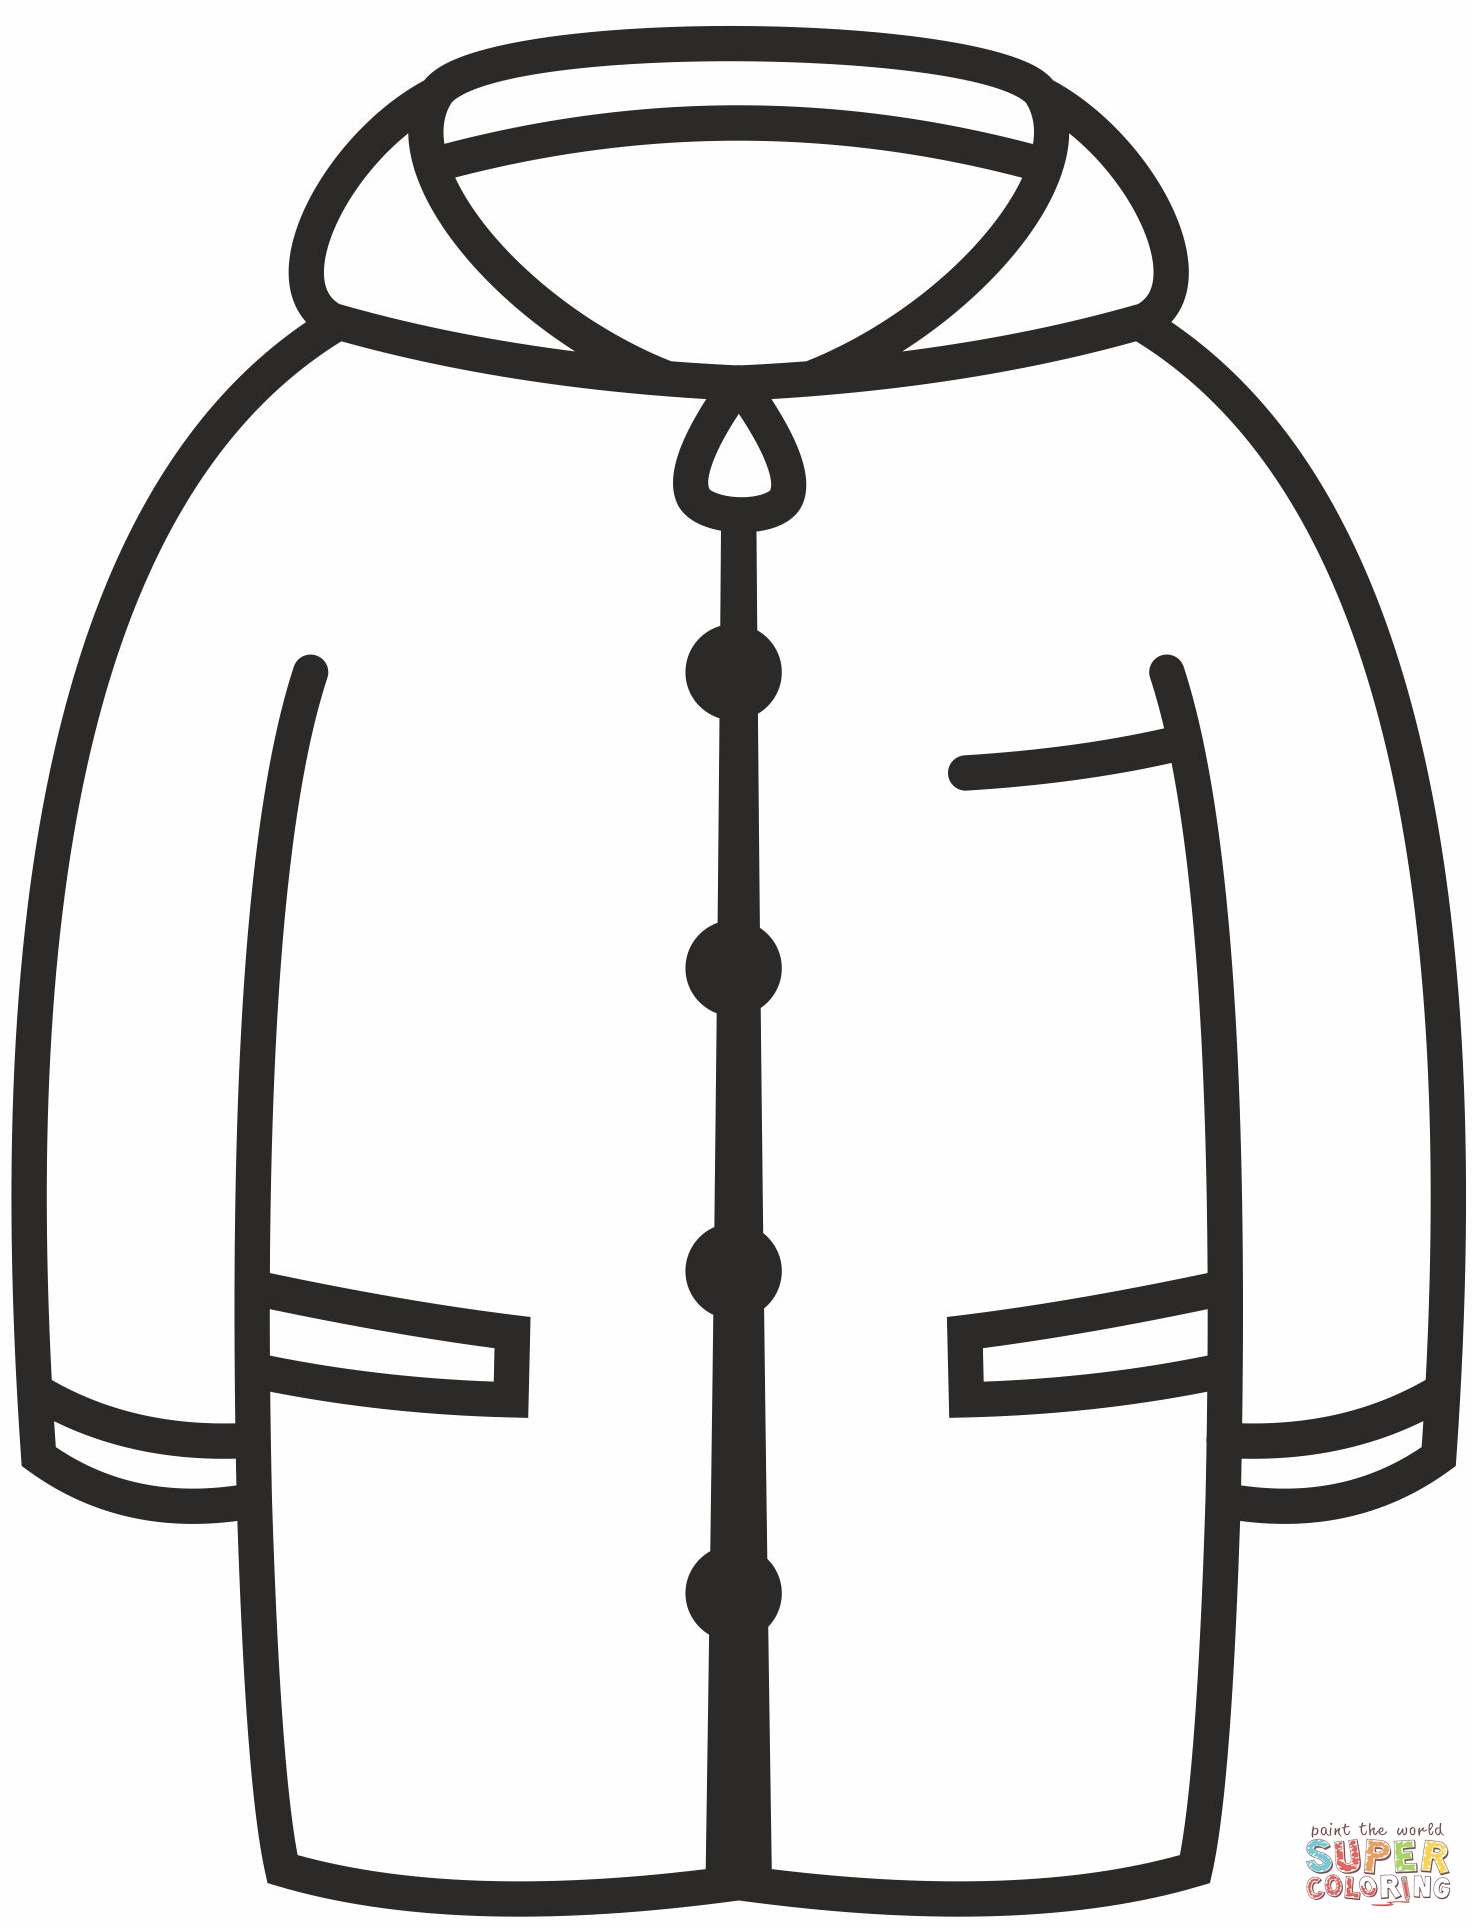 raincoat-coloring-page-free-printable-coloring-page-coloring-home